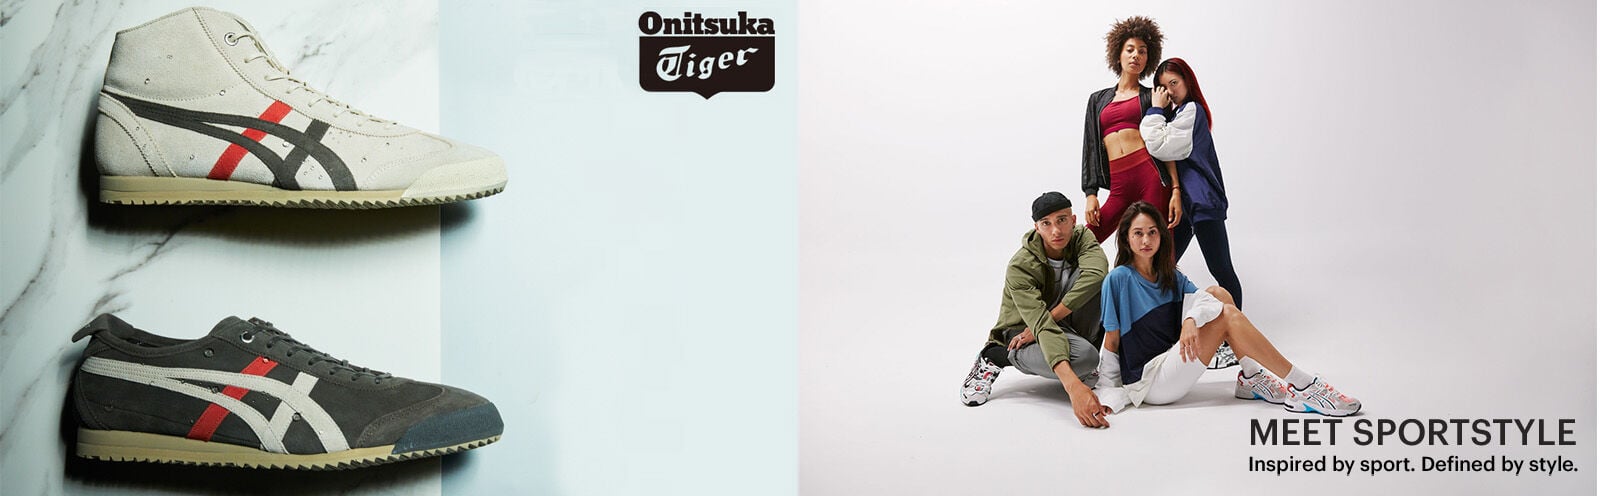 Are you looking for Onitsuka Tiger or Asics Tiger? | ASICS NL